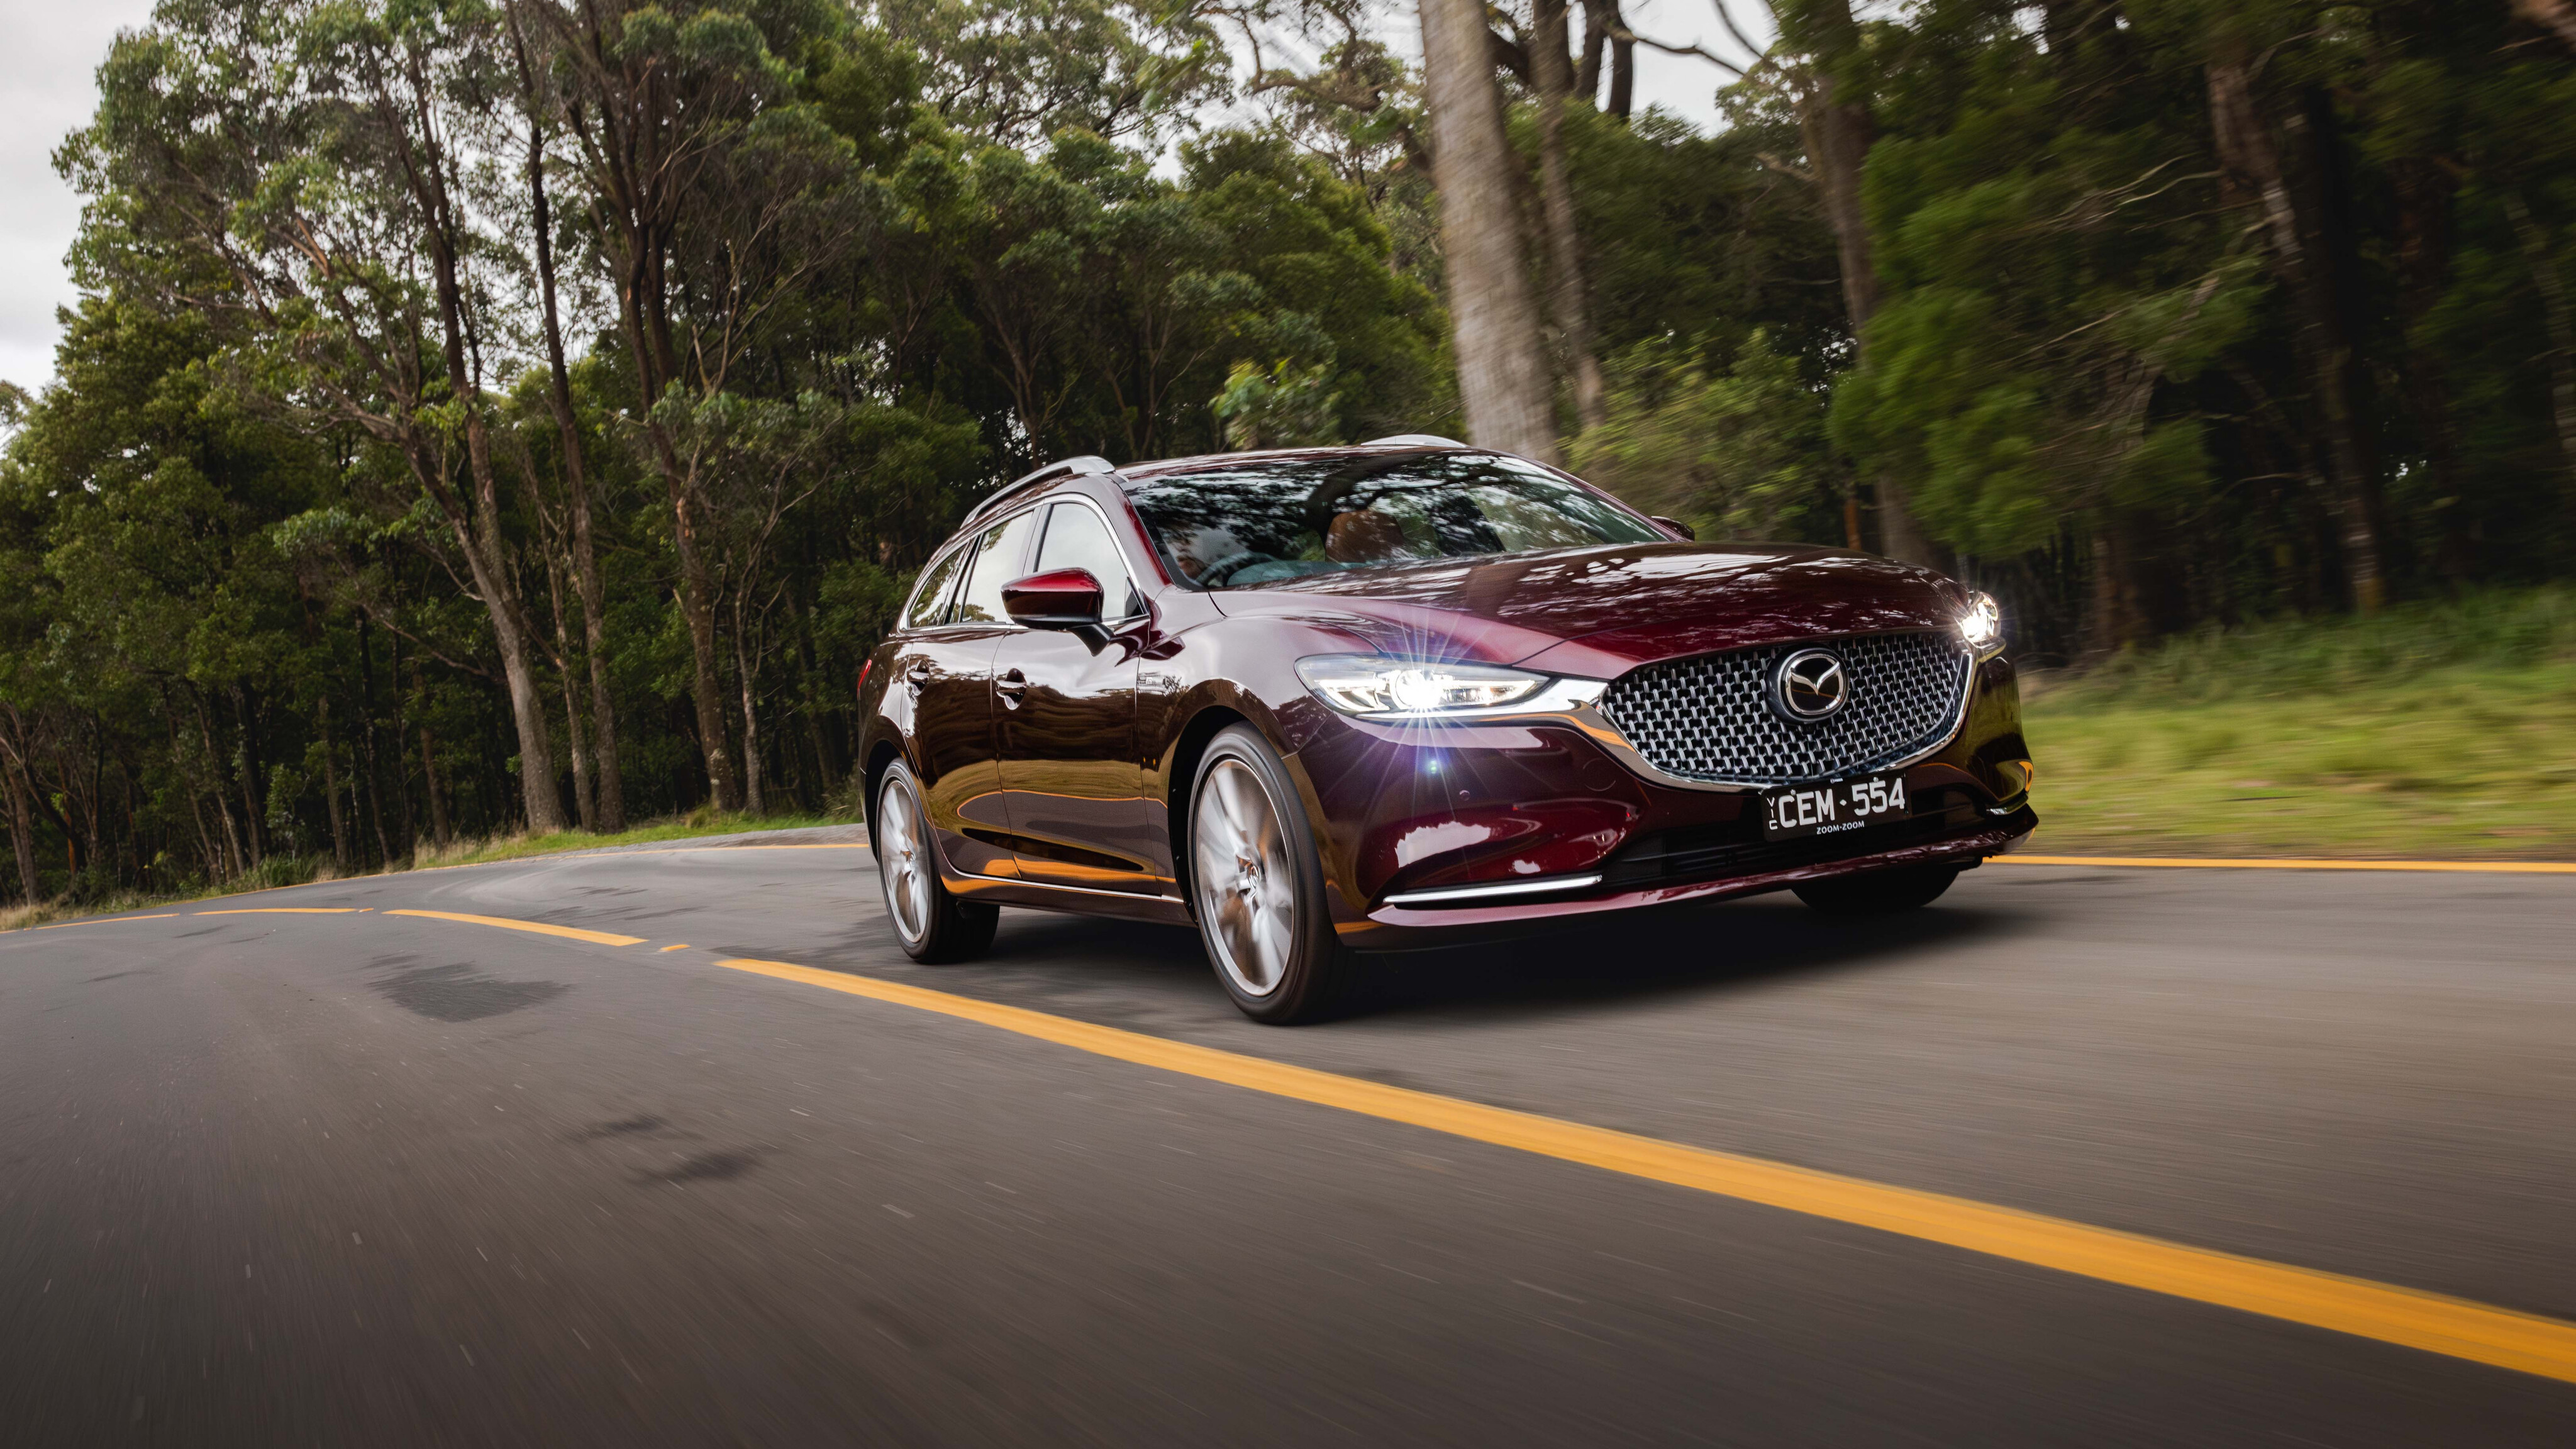 2023 Mazda 6 pricing and features: 20th Anniversary edition, new tech